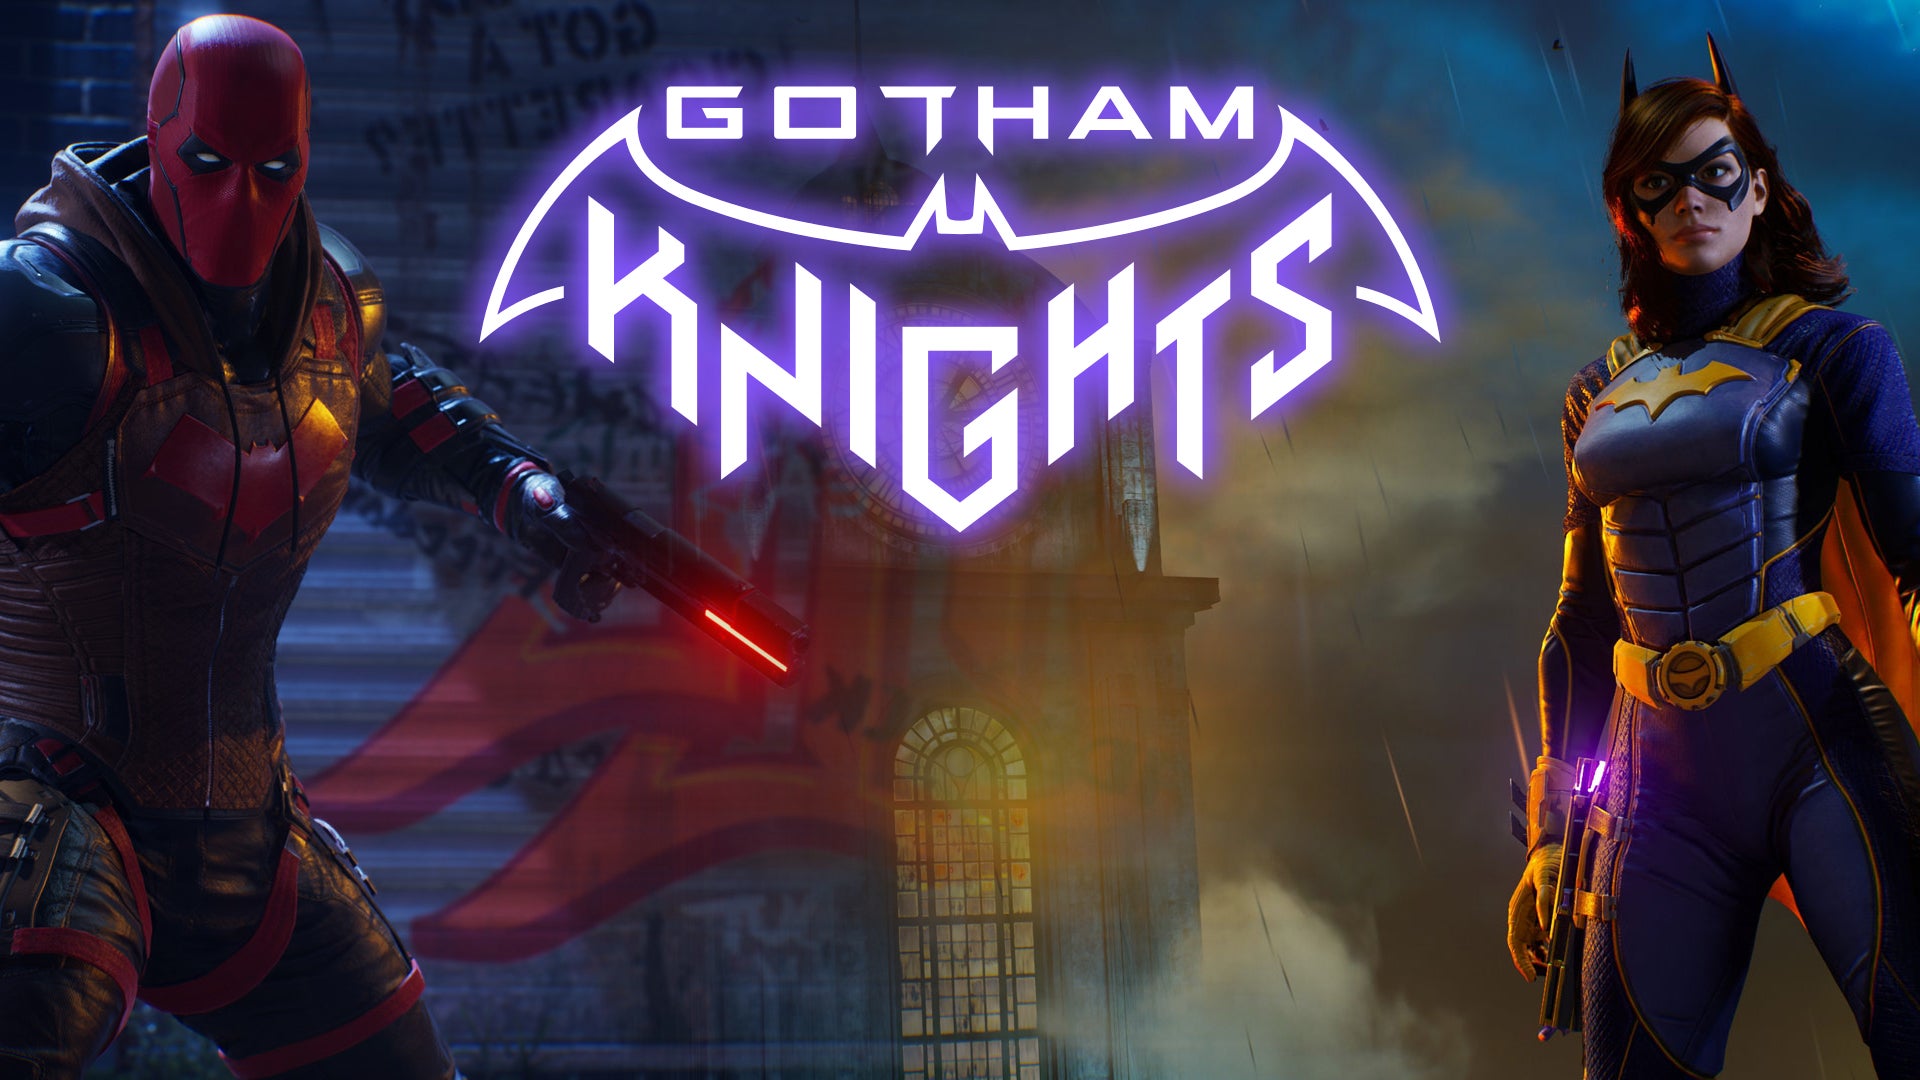 Image for Gotham Knights: Should you care about the DC game that doesn't star Batman?